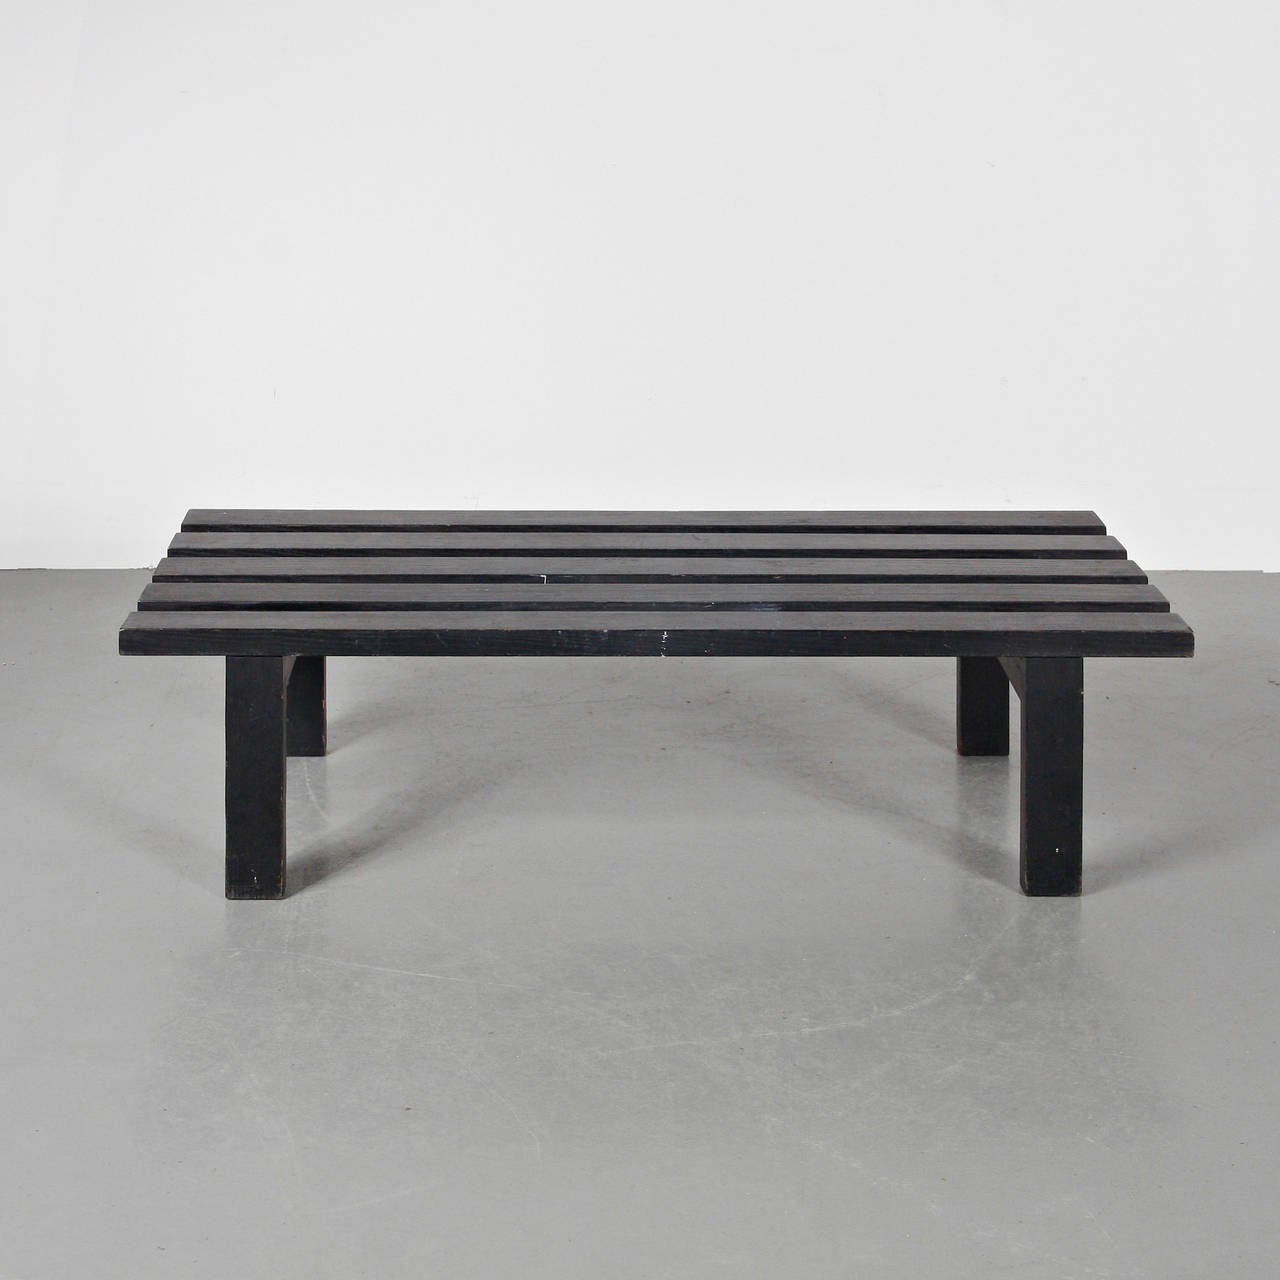 Bench designed by Martin Visser, manufactured in the Netherlands, circa 1950 by Spectrum.
Lacquered planks of wood in black. This is the short version.

Preserves the original label to the underside.

In good original condition, with minor wear